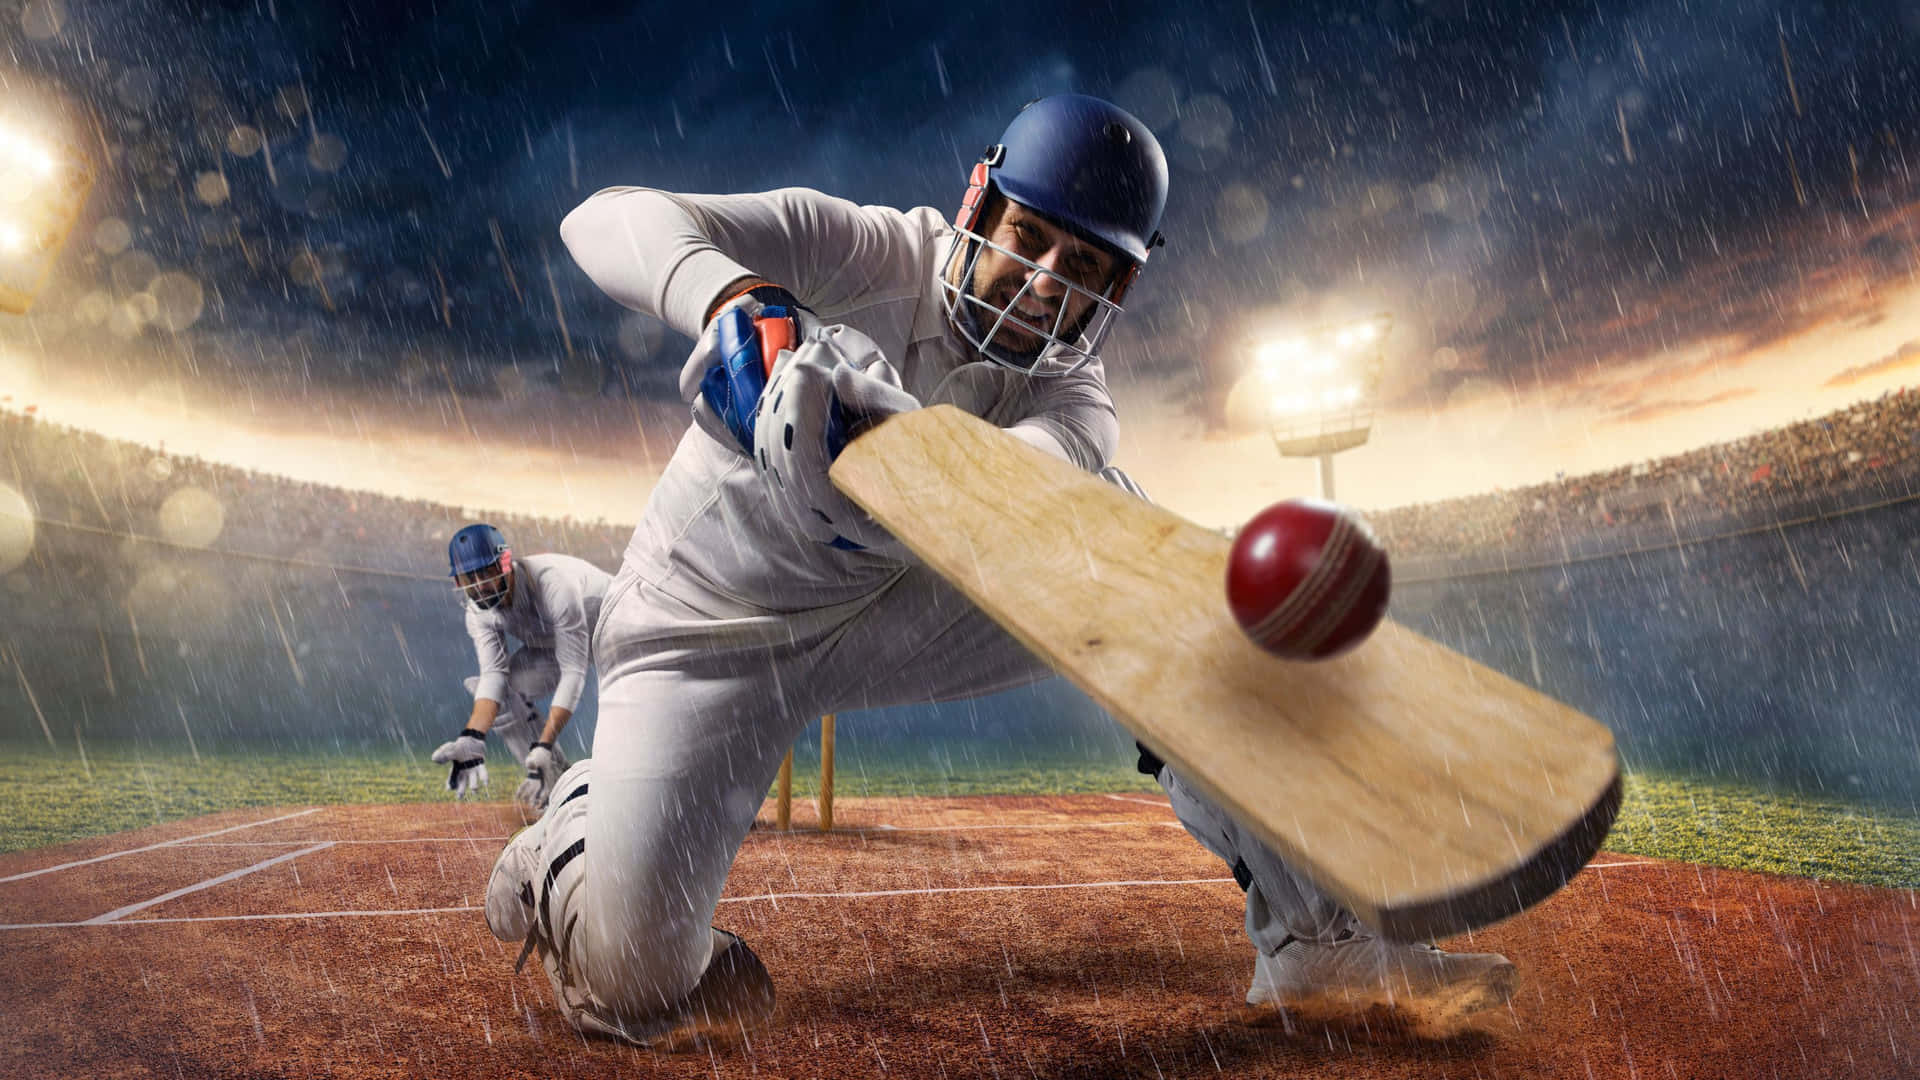 Cricket Player Hitting A Ball In The Rain